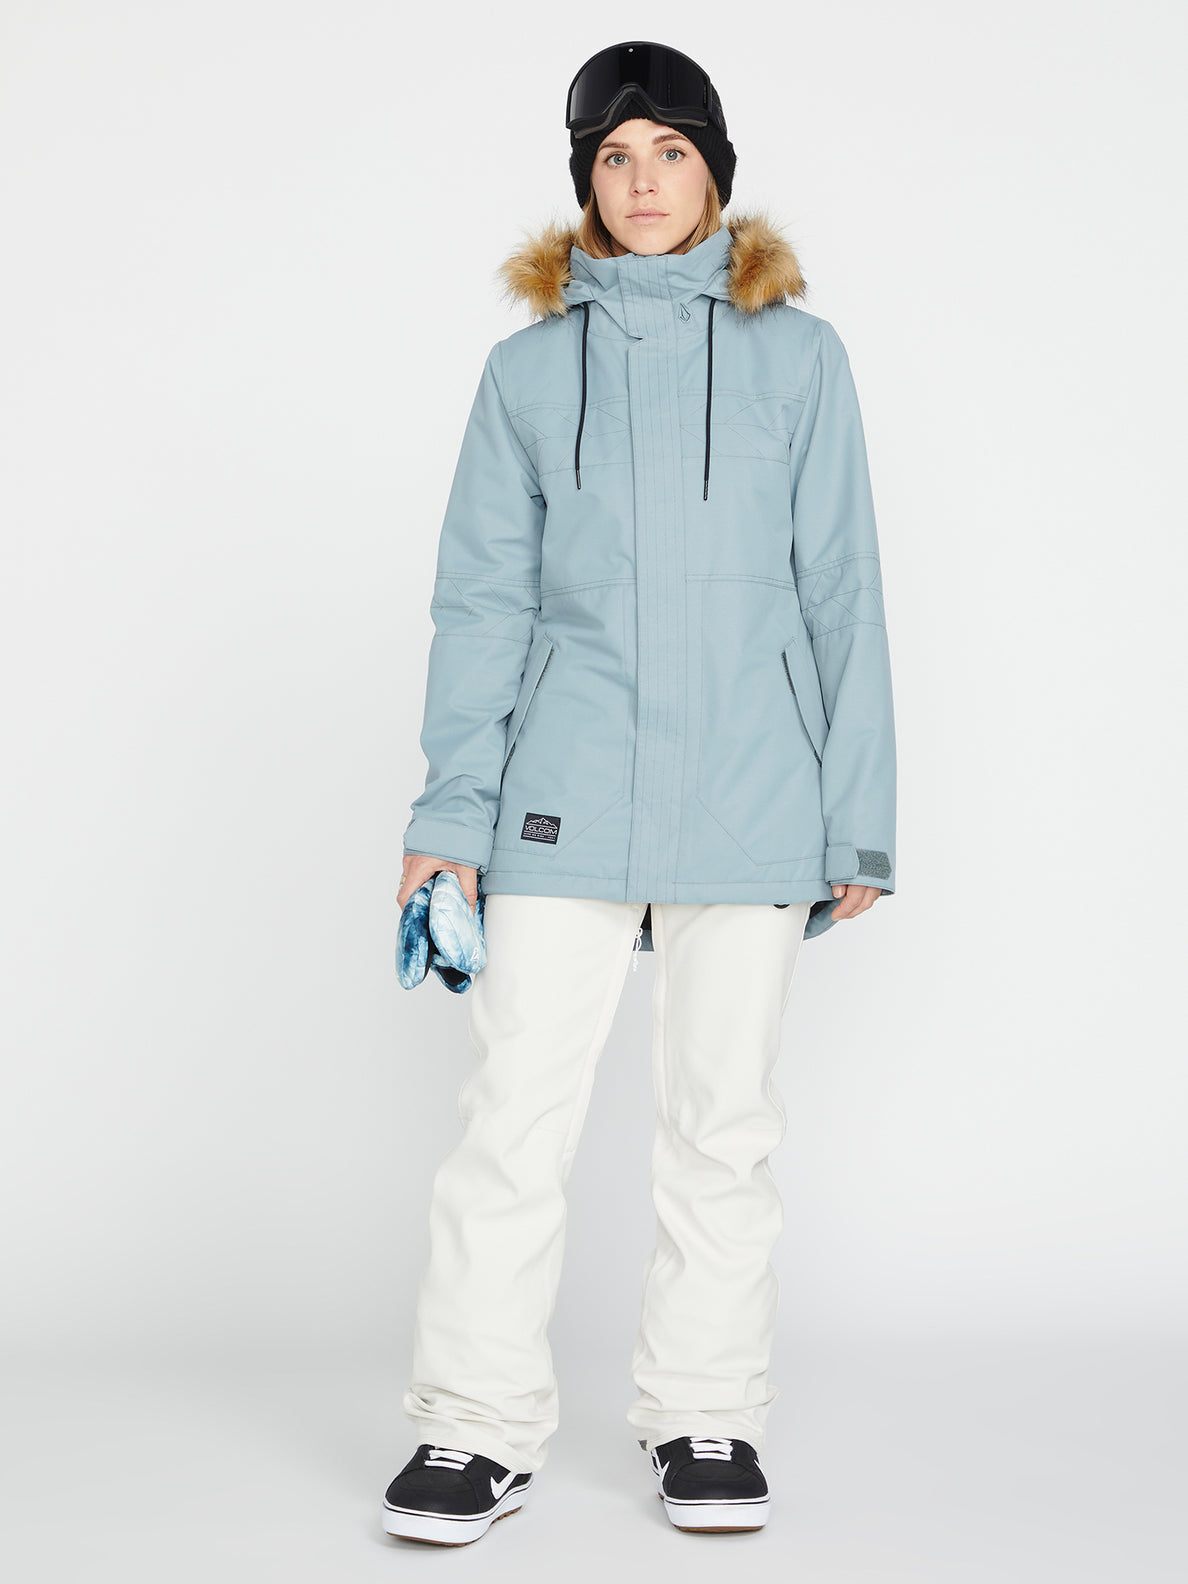 Buy Off-White Jackets & Coats for Women by Teamspirit Online | Ajio.com